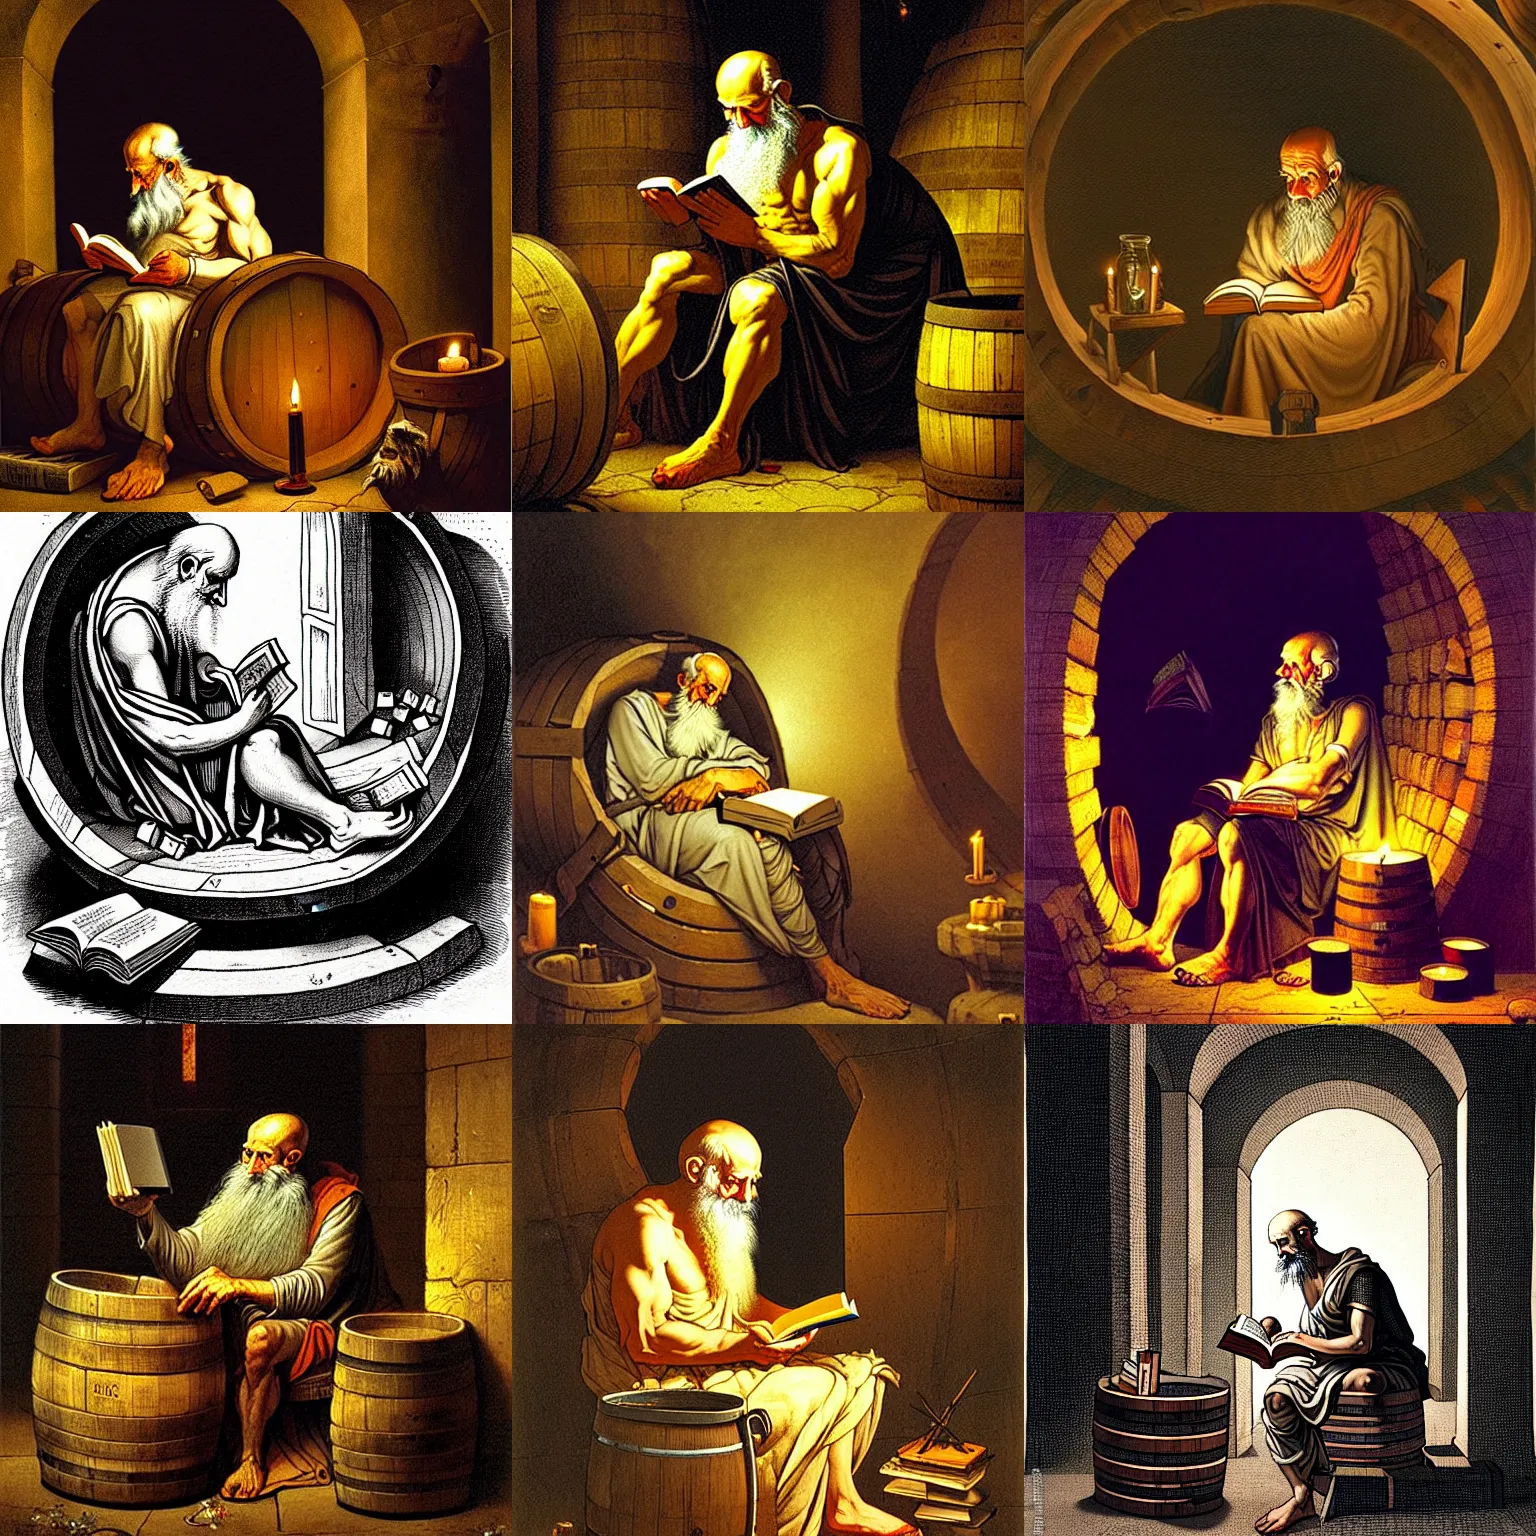 diogenes of sipone reading a book inside his barrel at | Stable ...